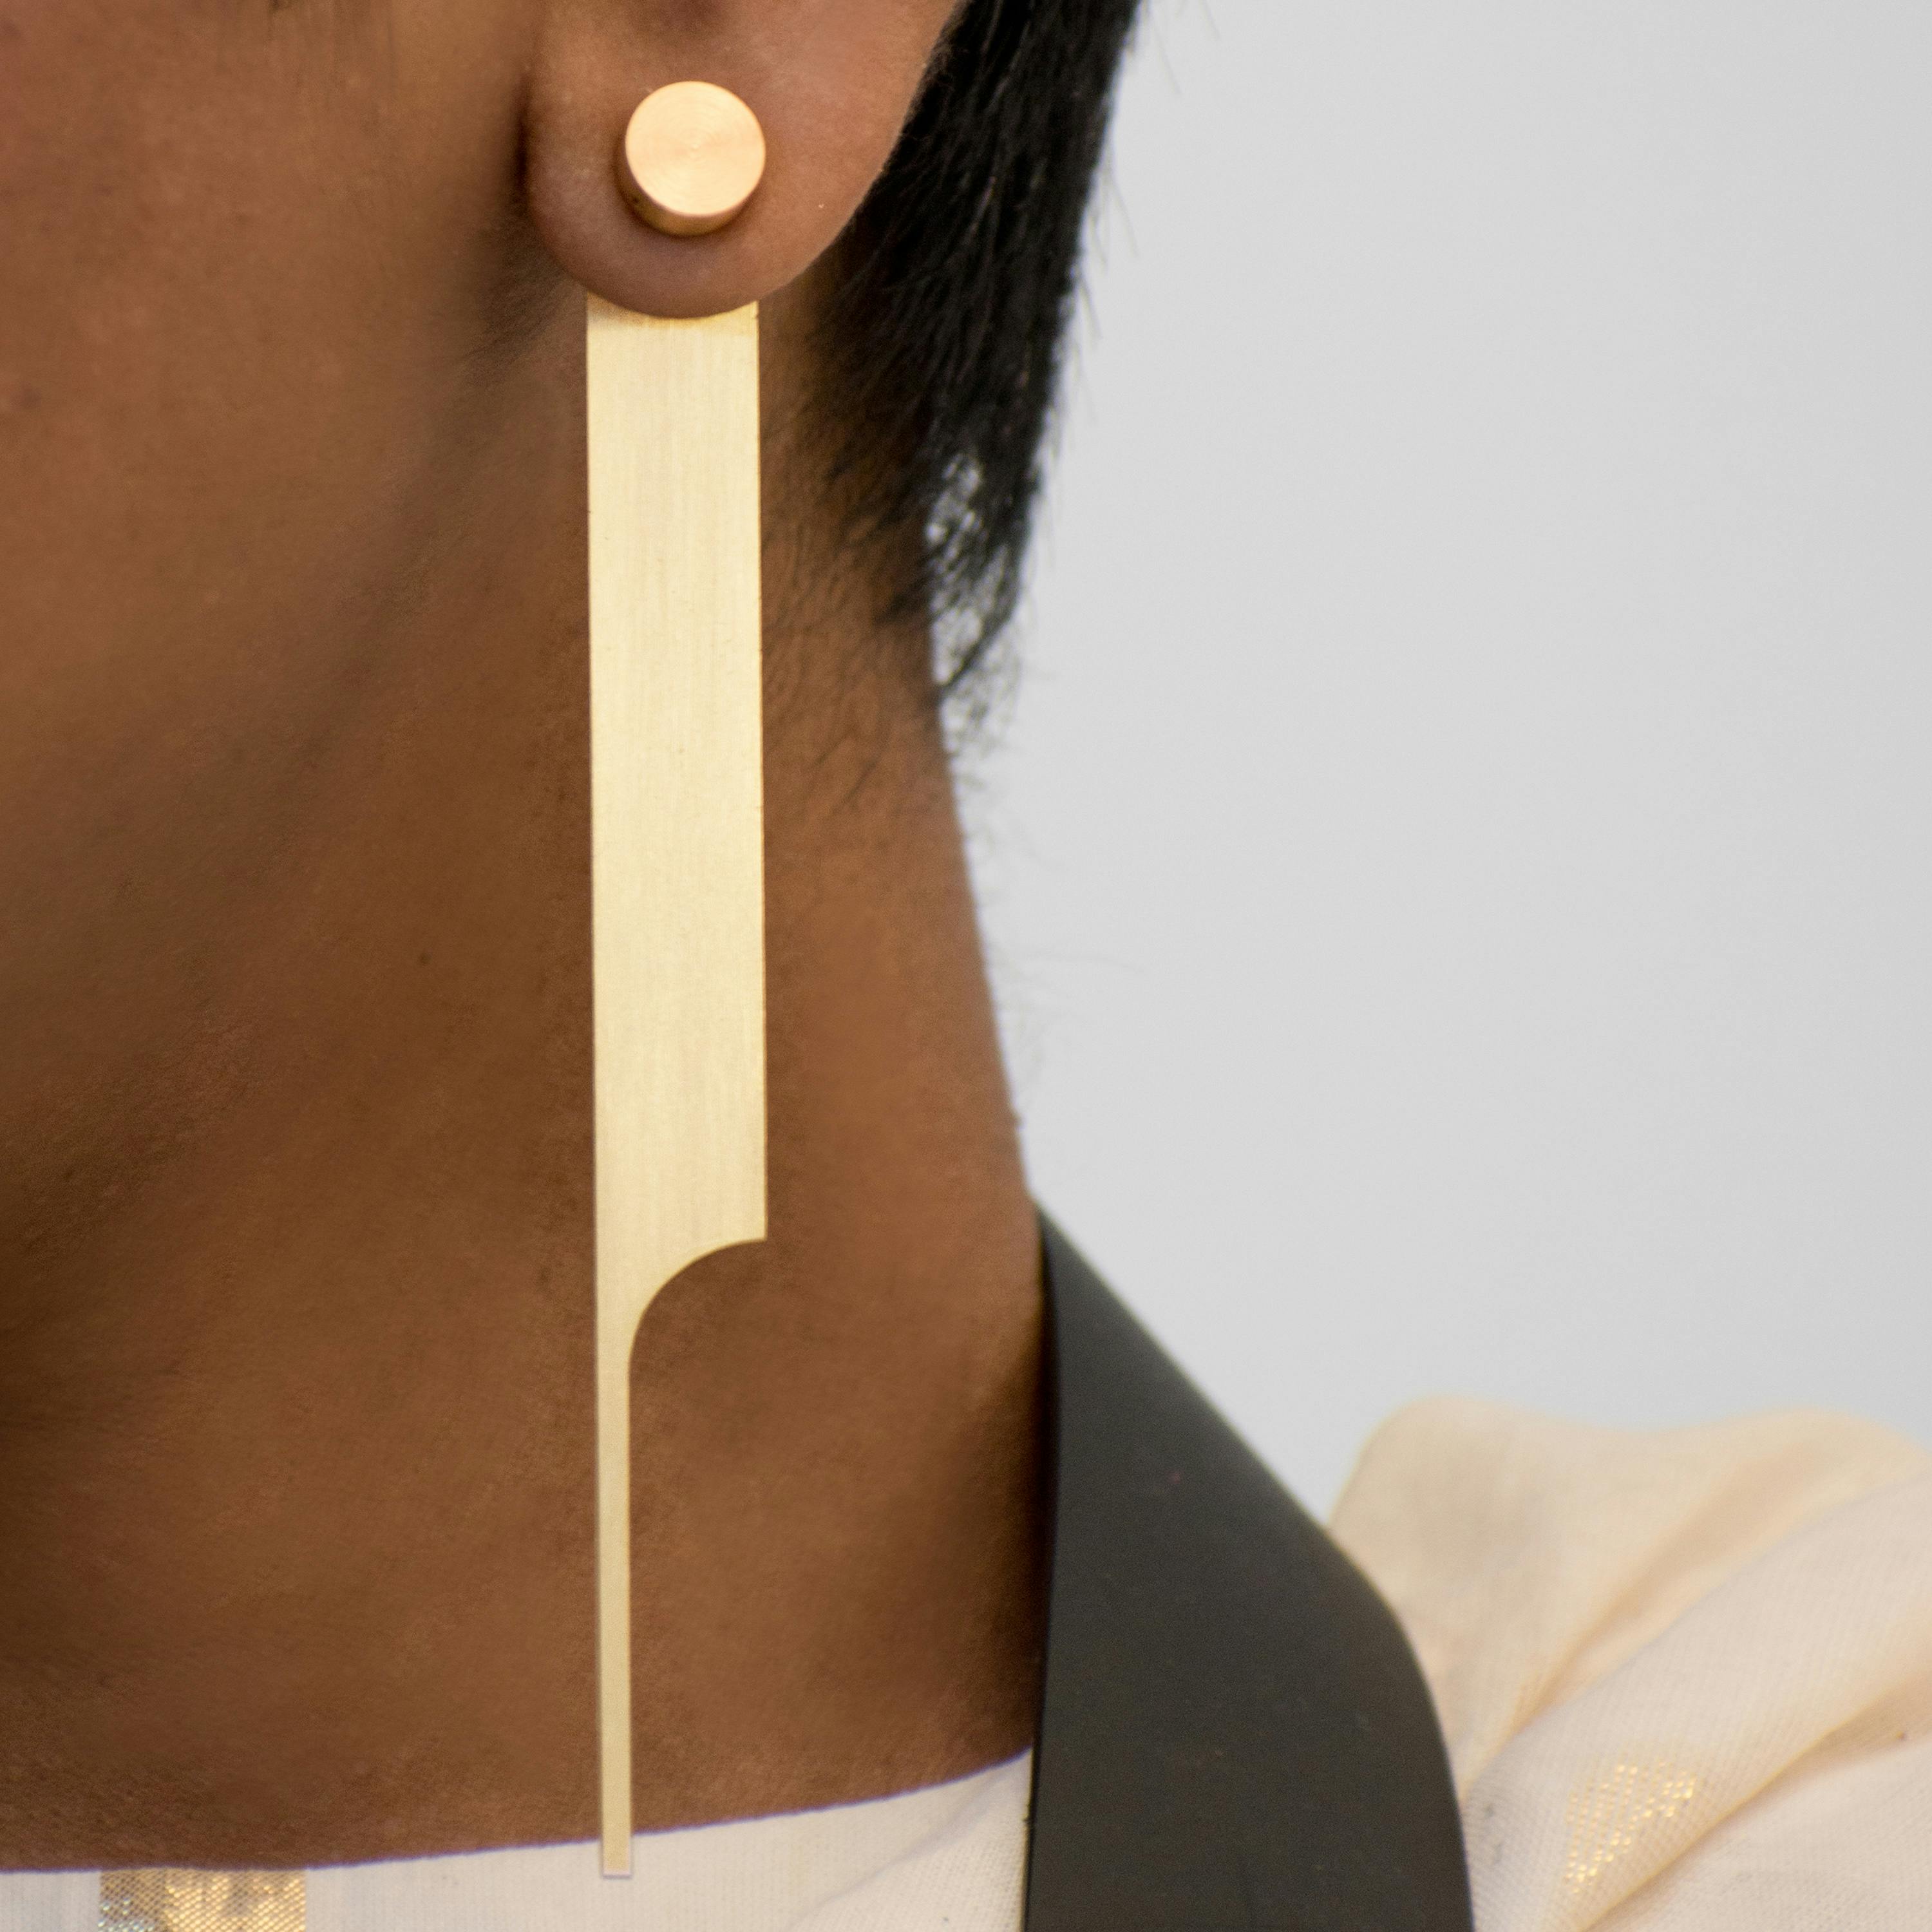 The Sharp End Earrings, a product by NO NA MÉ